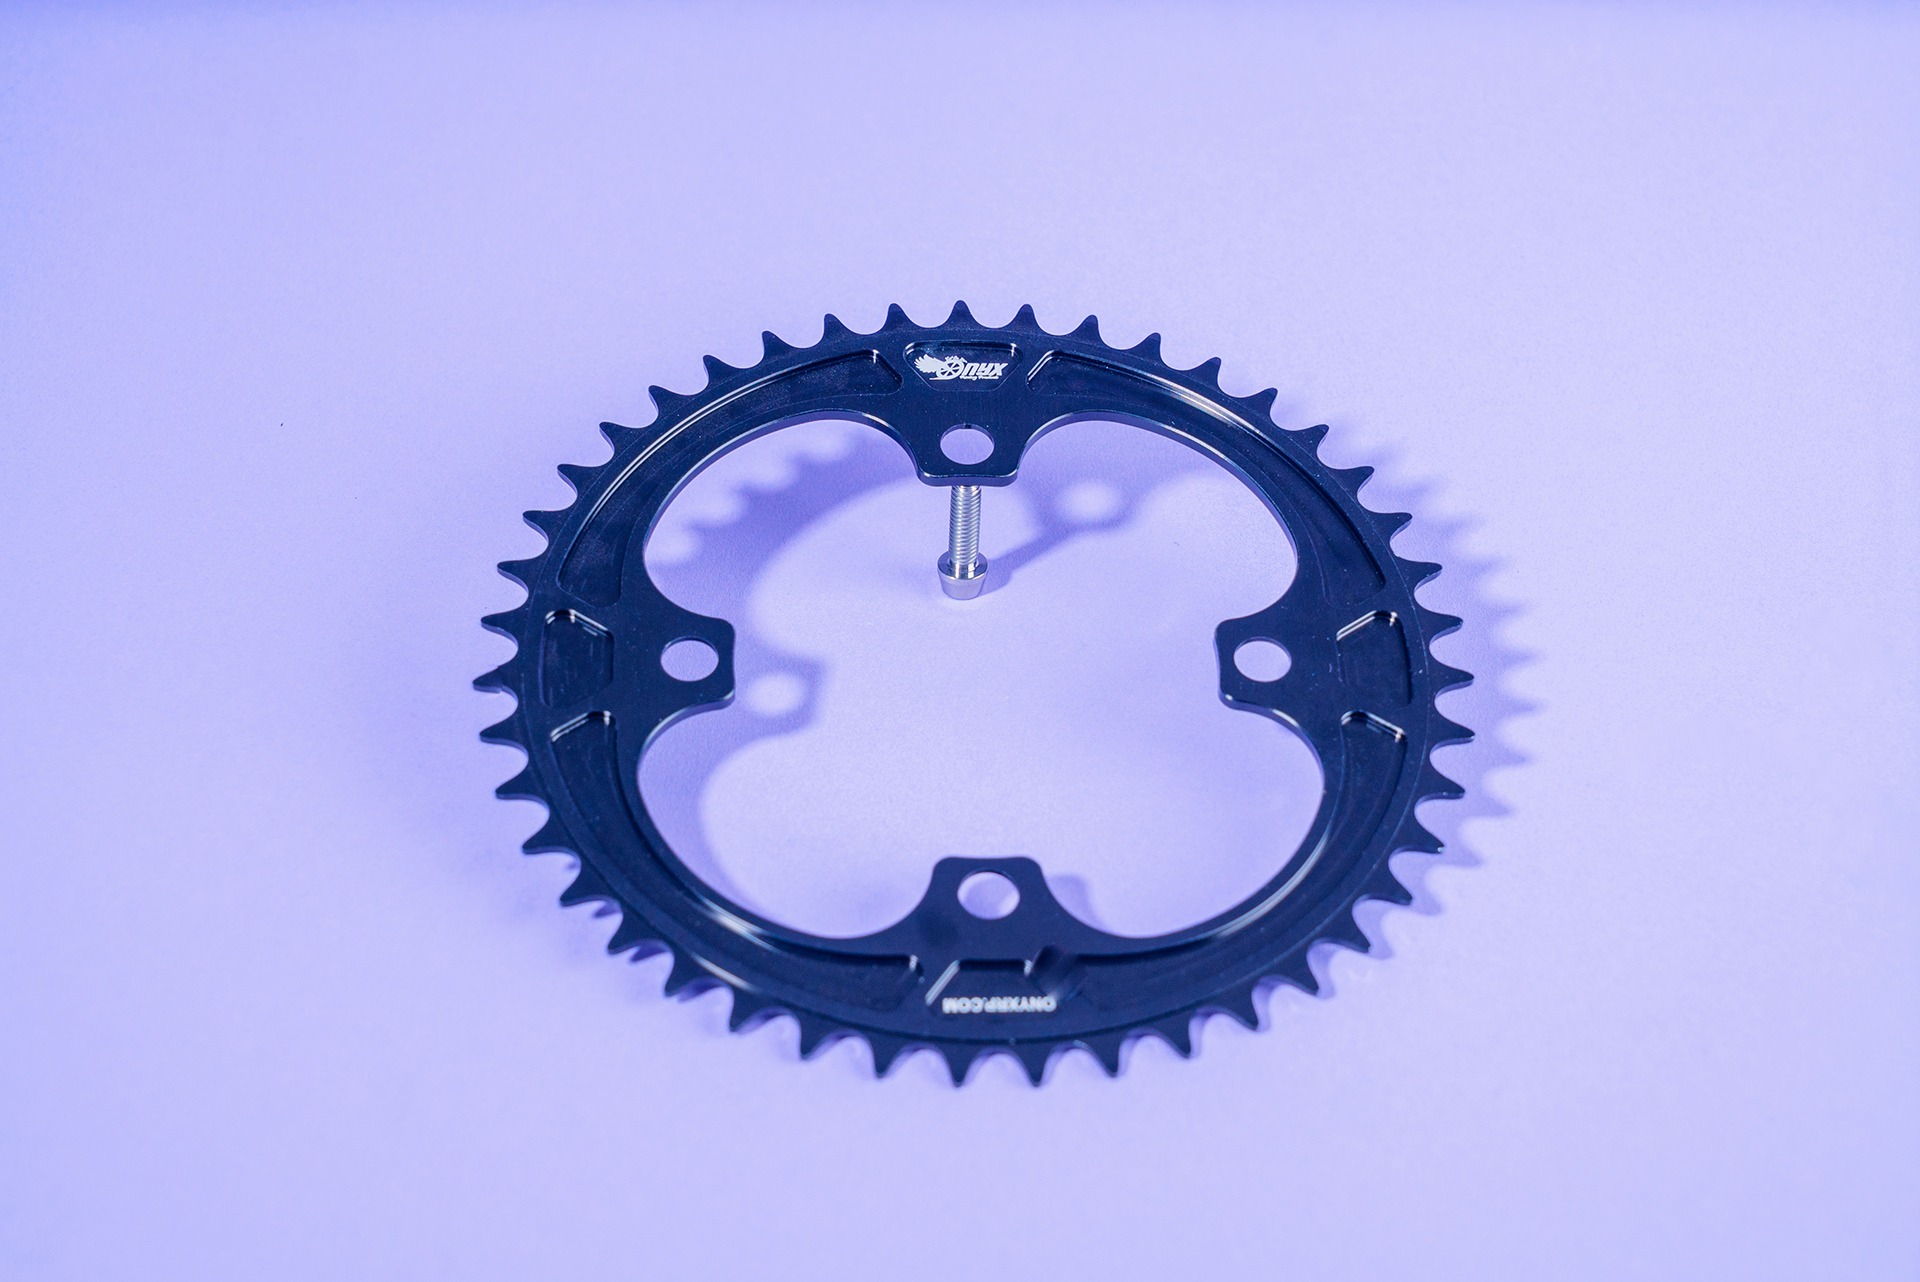 ONYX - 4 BOLT 104 CHAINRING - REVIEW